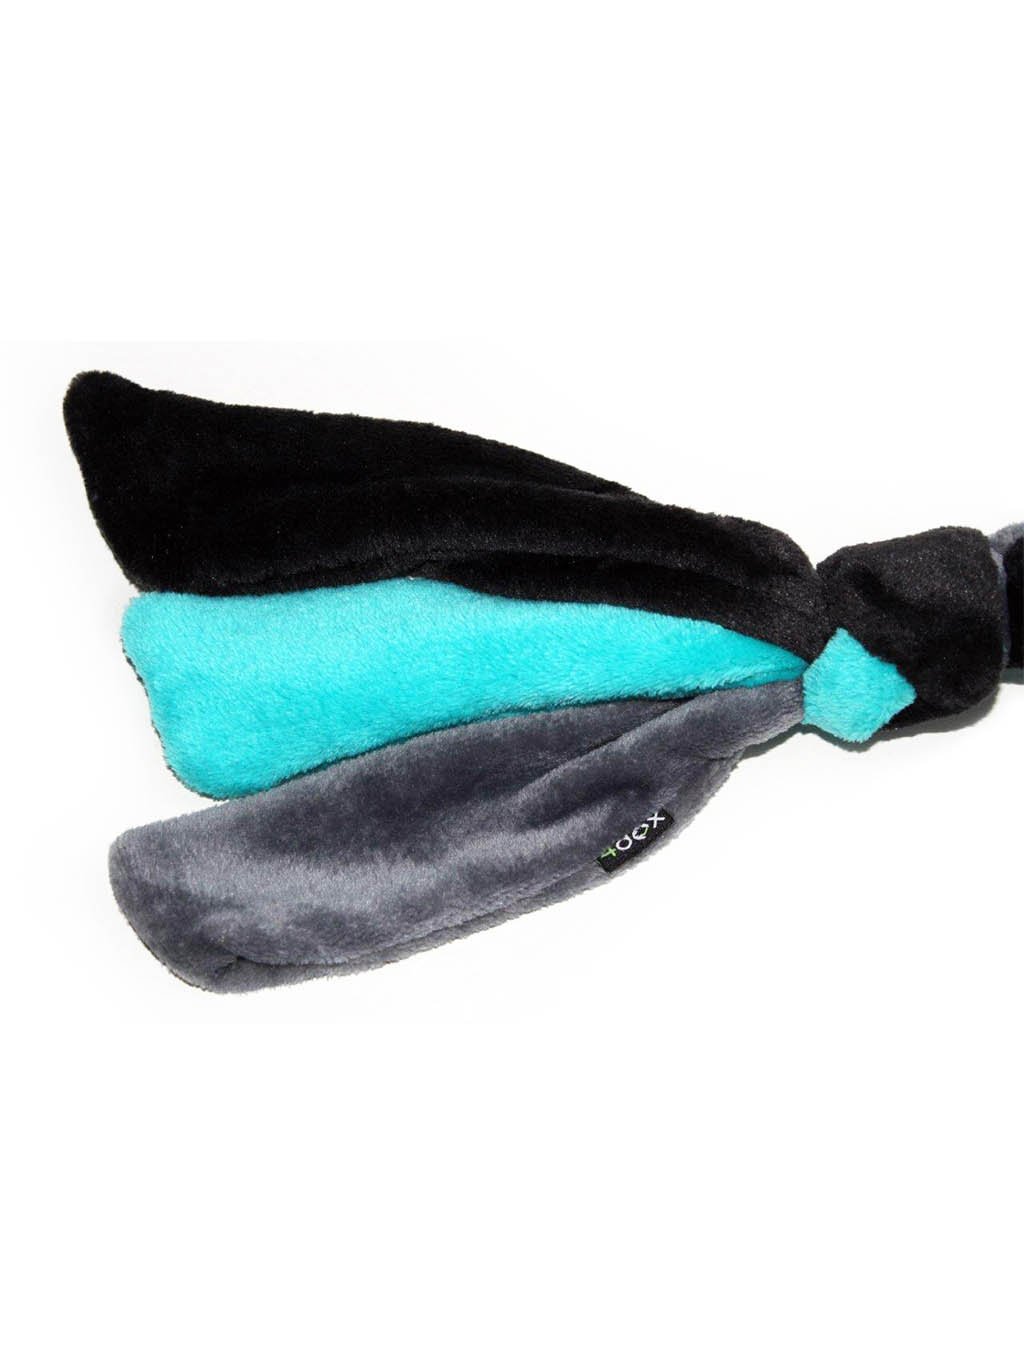 Knitted tug toy - turquoise/grey